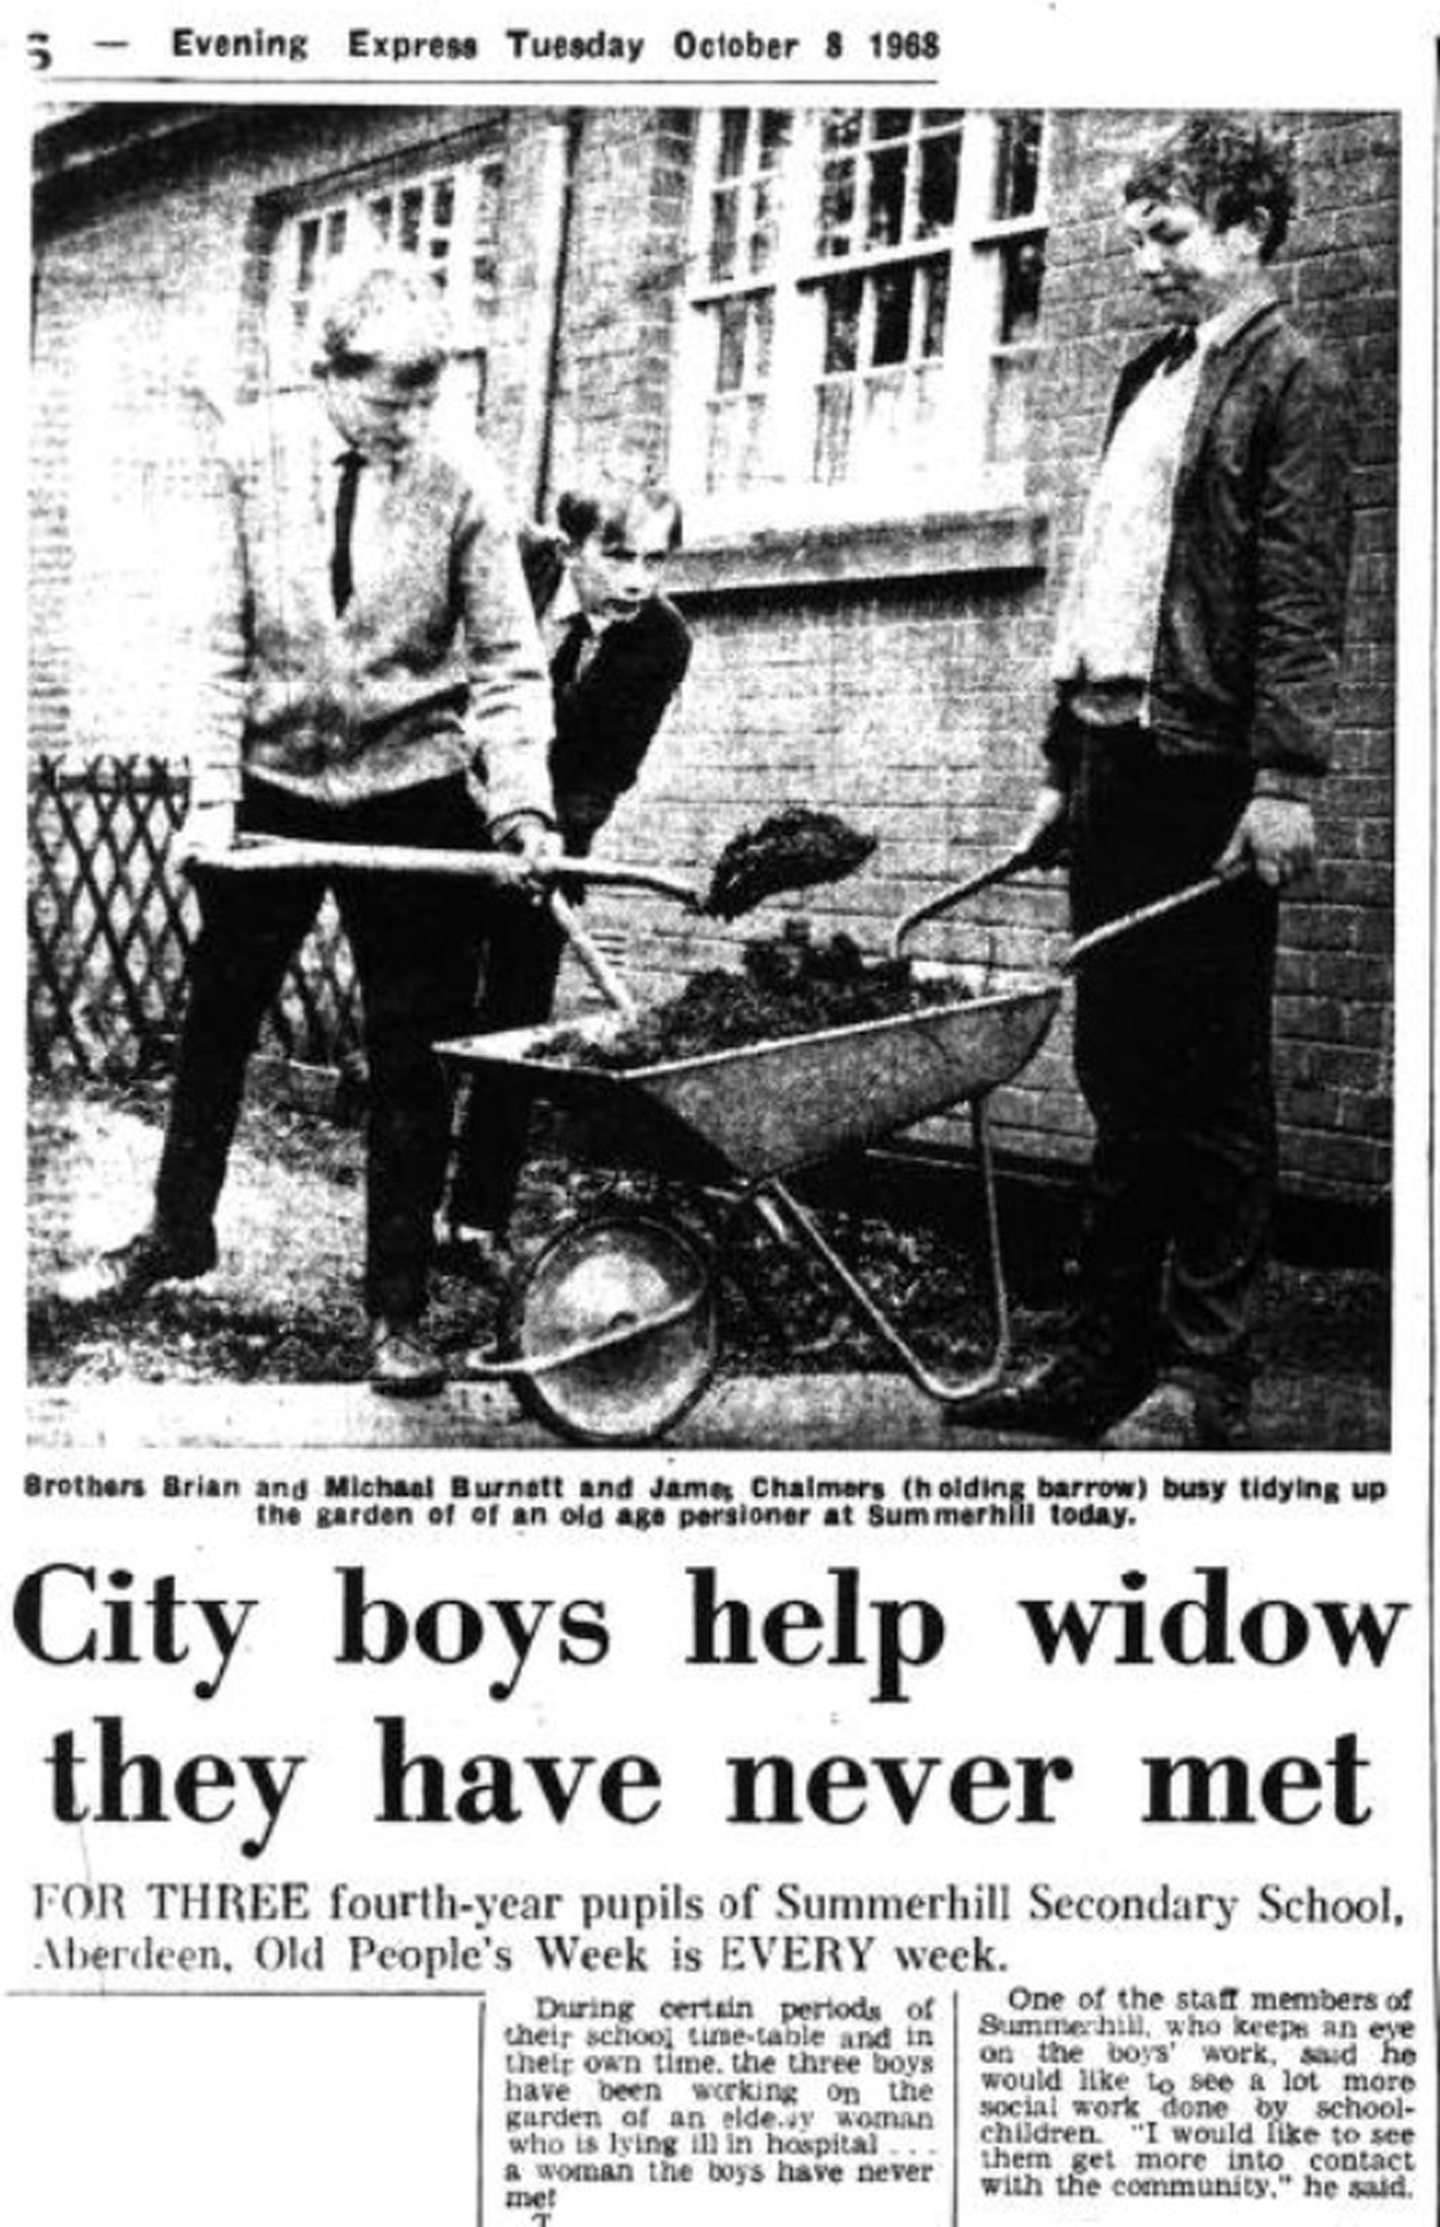 Newspaper clipping covering story of Summerhill School pupils helping out in the garden of an elderly lady.